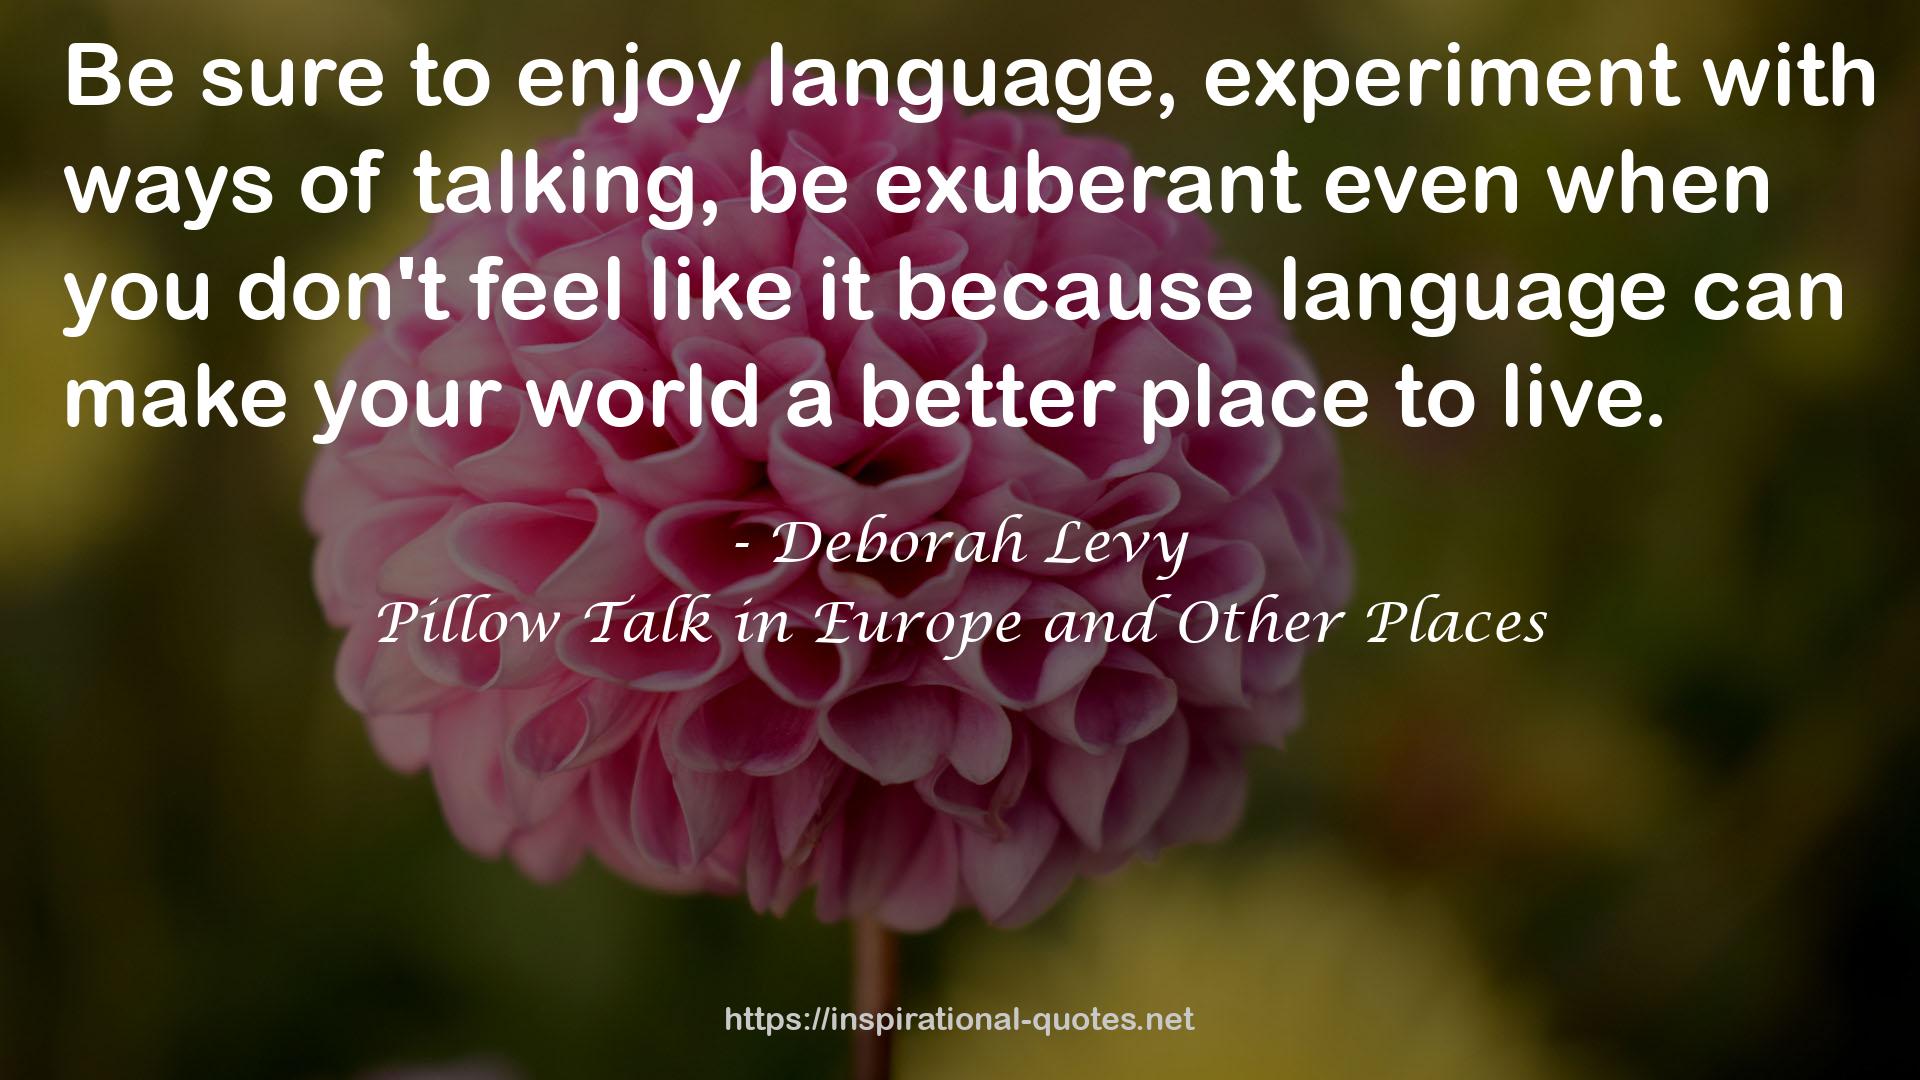 Pillow Talk in Europe and Other Places QUOTES